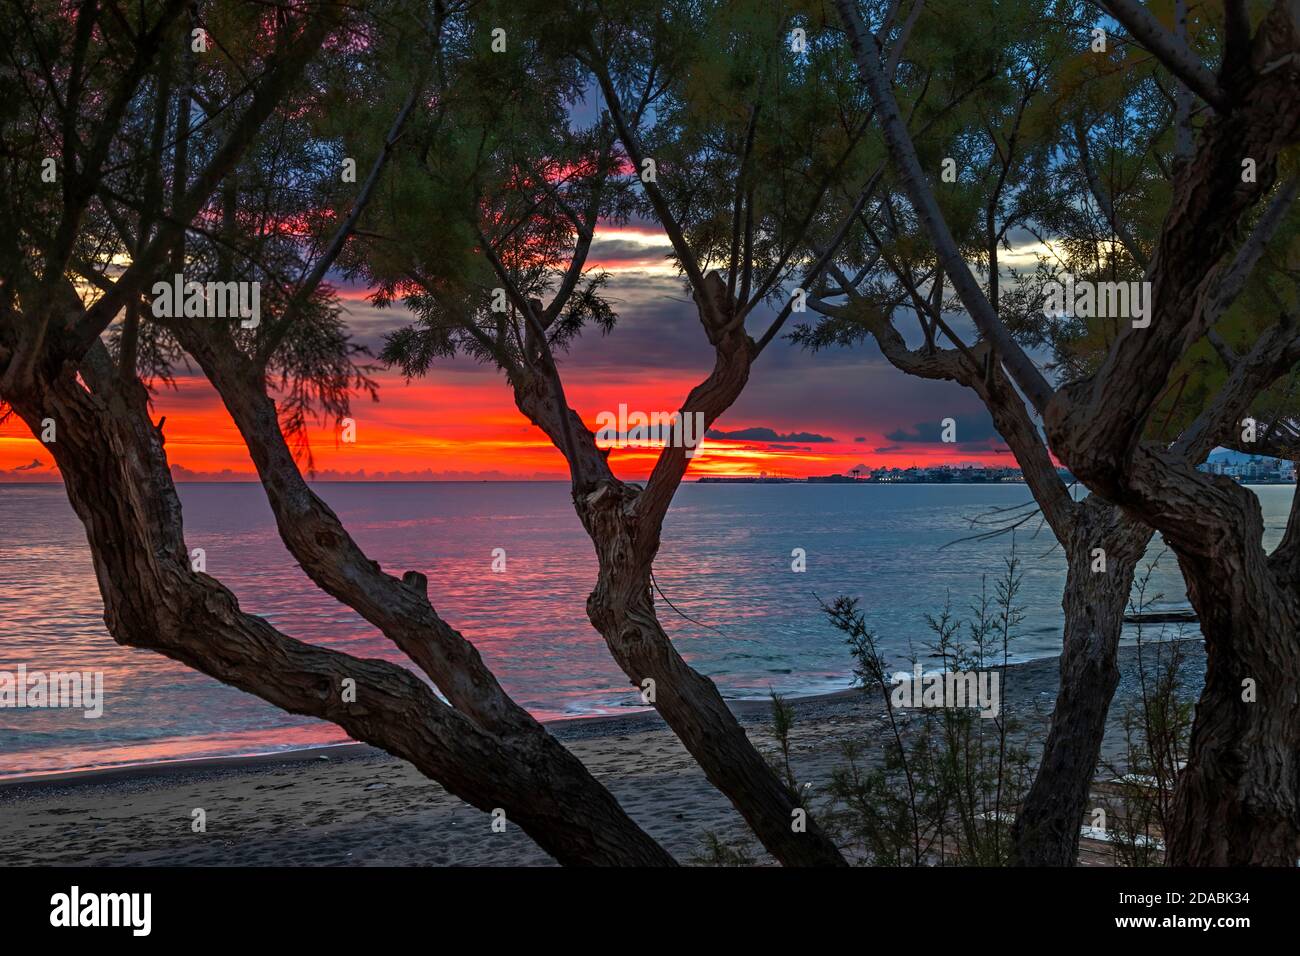 Sunset at Ierapetra town (Lassithi, Crete, Greece) at the edge of two seasons, end of summer, beginning of autumn. Stock Photo